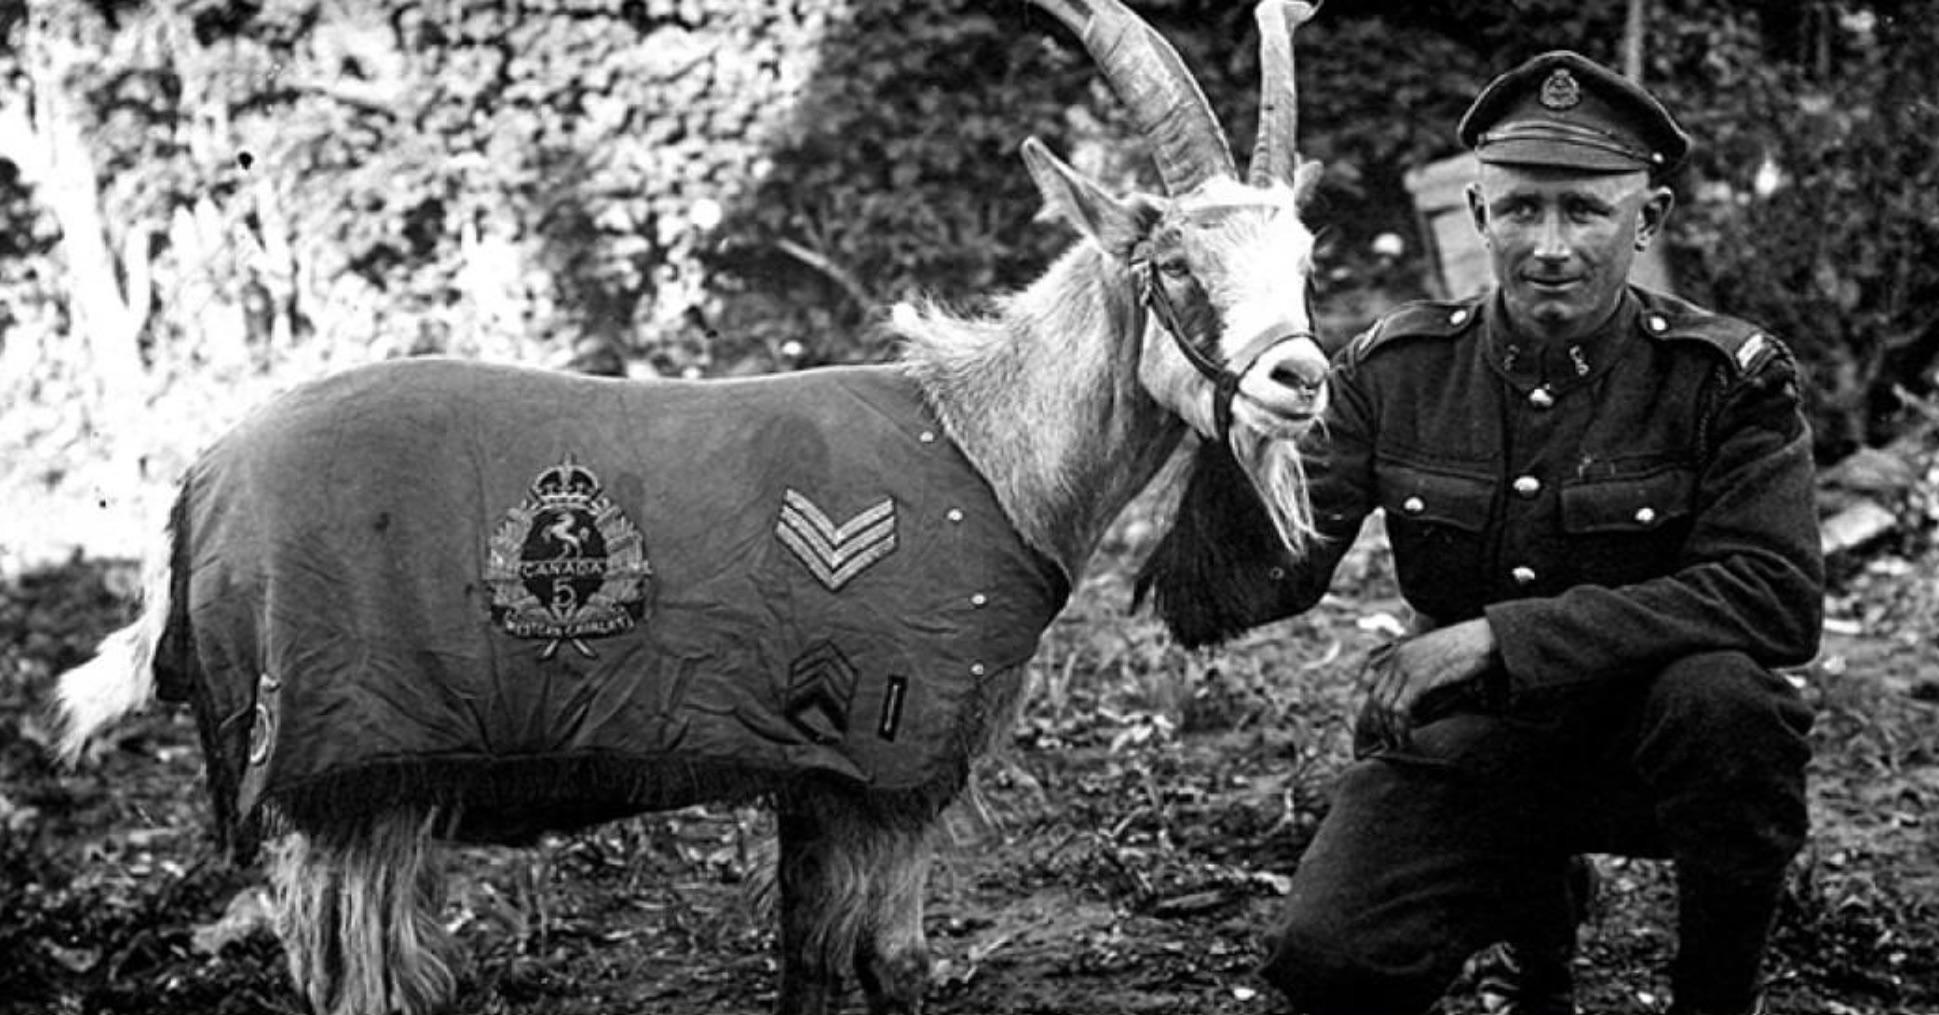 Canadian armed forces official goat, circa 1916. Goat attended battles though did not actively participate in the fighting.jpg